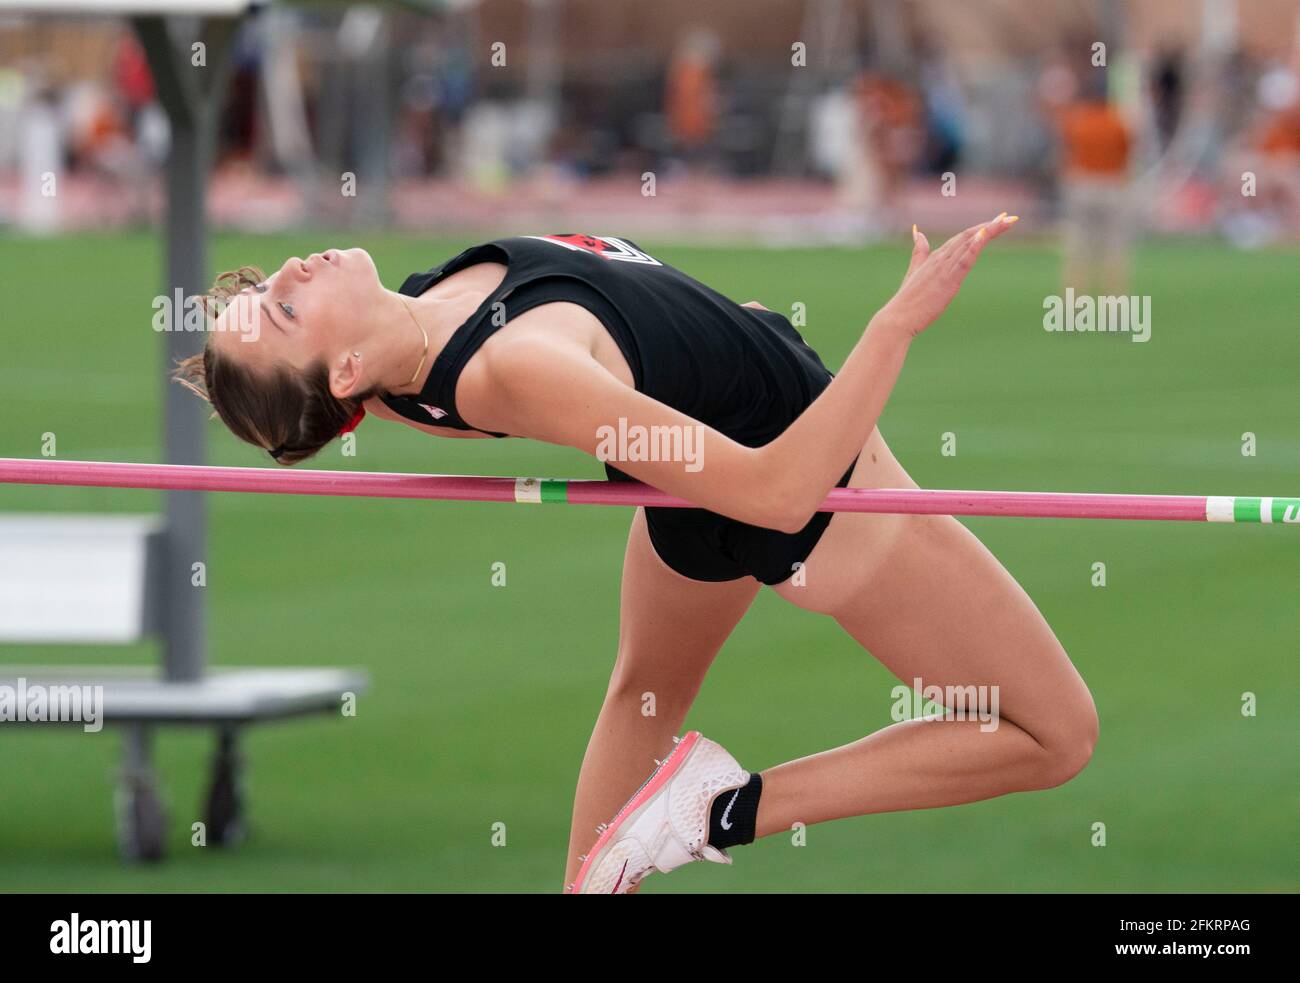 Austin, Texas, USA. 01st May, 2021: Elite college athlete Cassie Ackemann of SMU competing in the women's high jump at the Texas Invitational at Mike A. Myers Stadium at the University of Texas at Austin. Credit: Bob Daemmrich/Alamy Live News Stock Photo